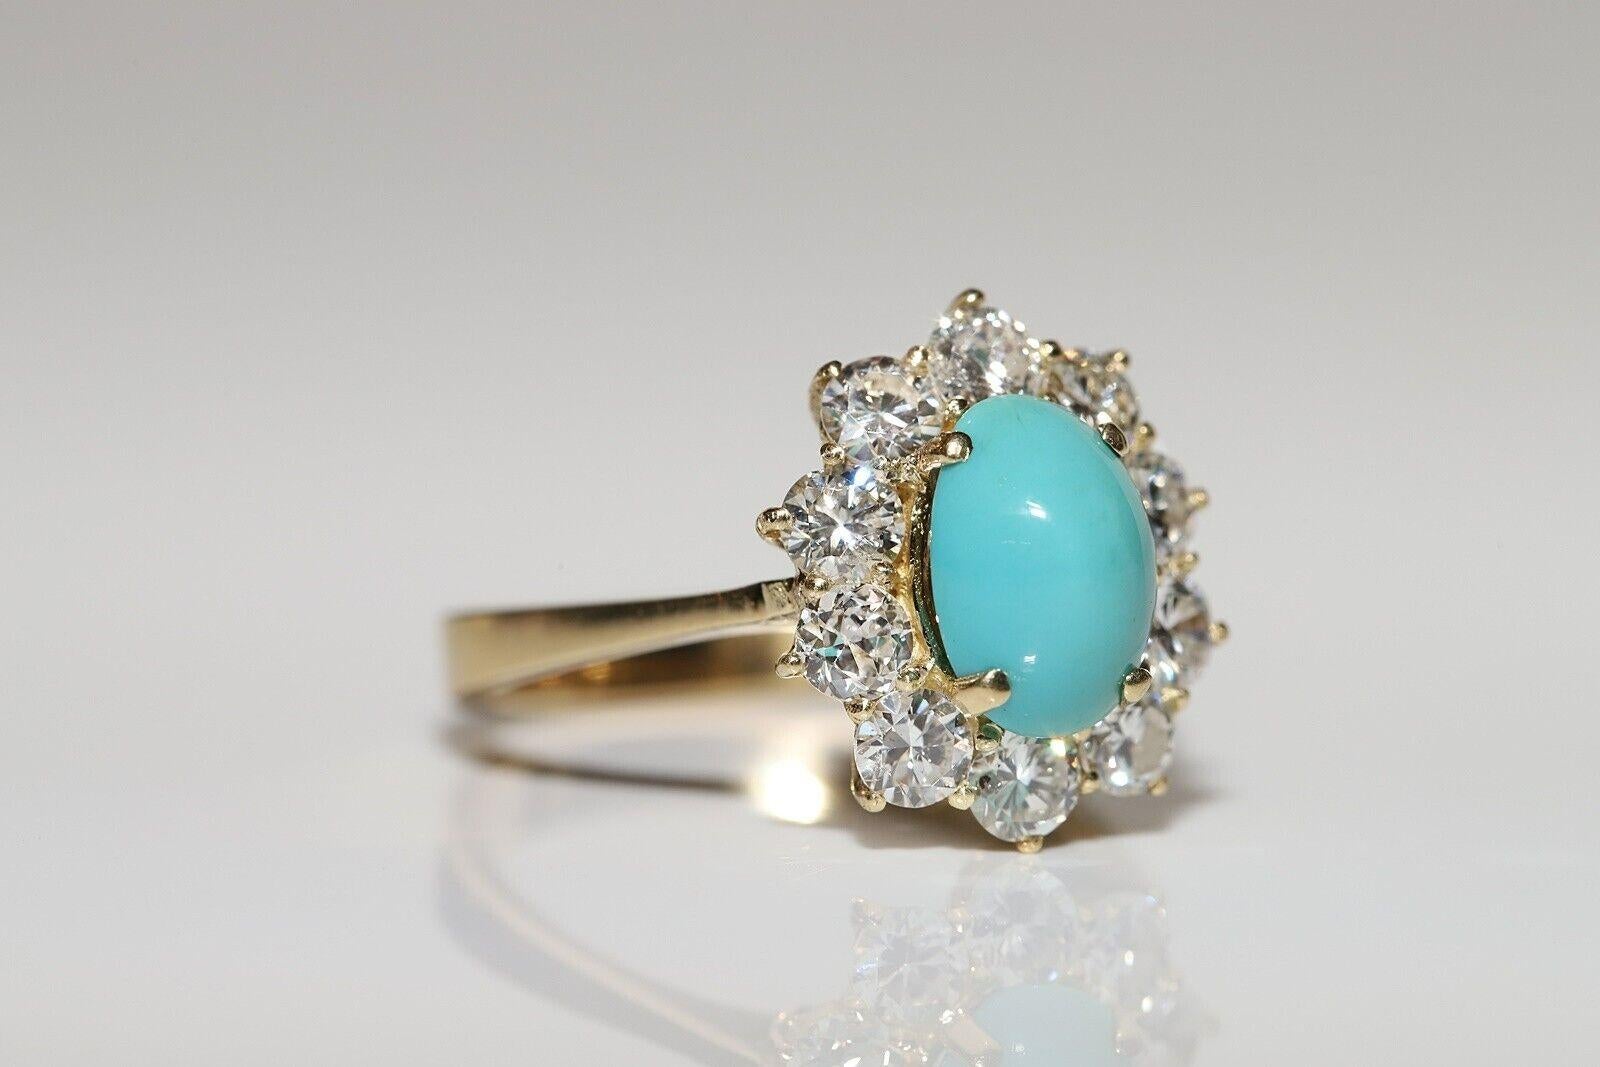 Brilliant Cut Vintage Circa 1980s 14k Gold Natural Diamond And Turquoise Decorated Ring For Sale